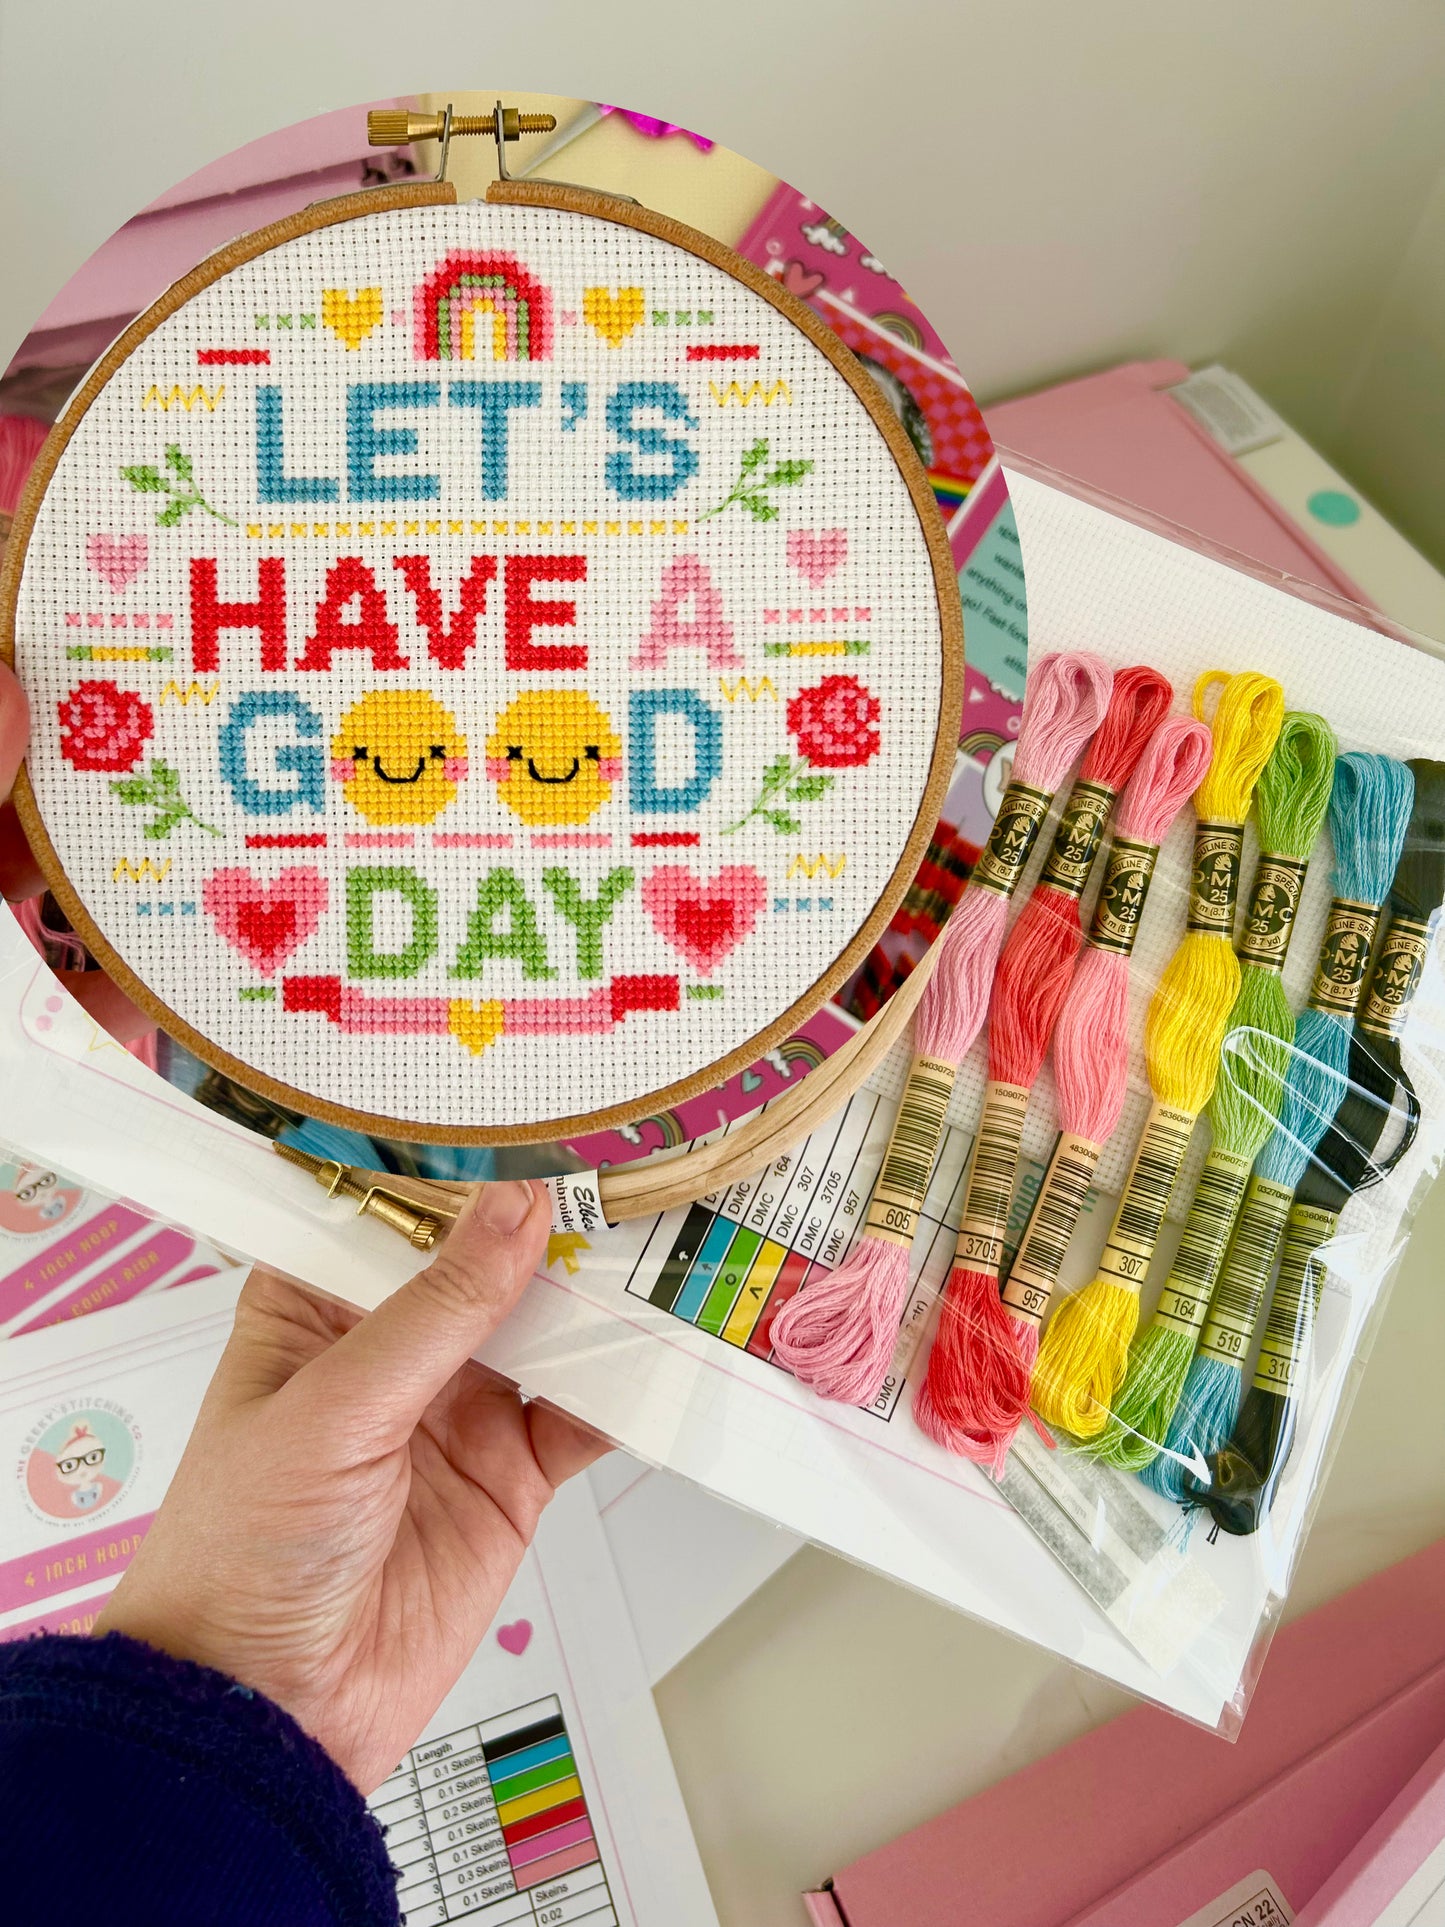 Let's' have a good day- *Cross Stitch Kit*